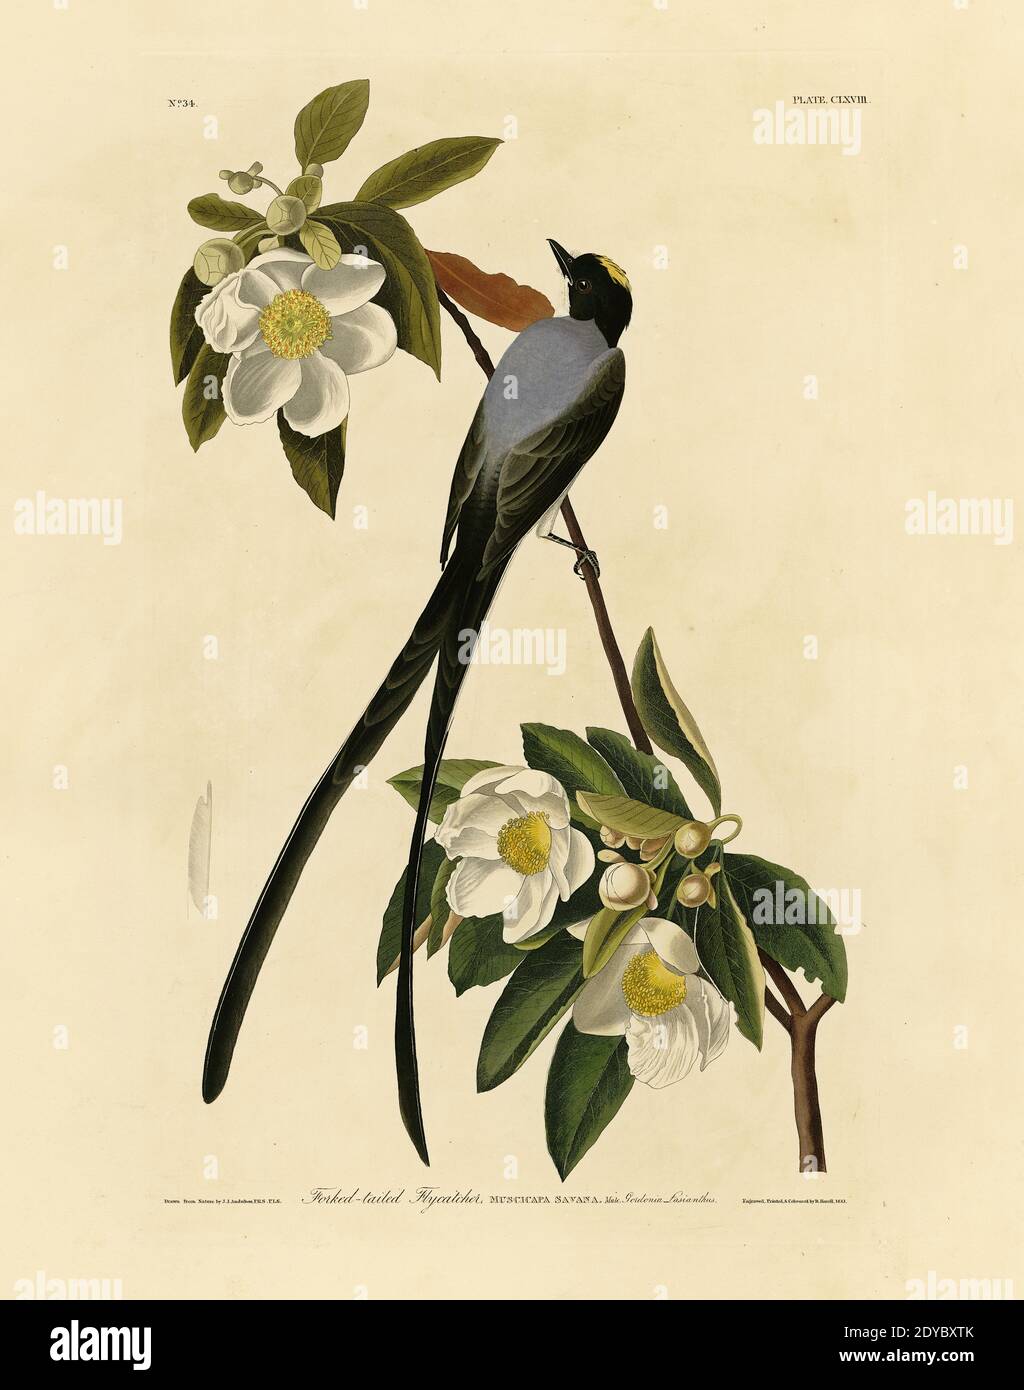 Plate 168 Fork-tailed Flycatcher, from The Birds of America folio (1827–1839) by John James Audubon - Very high resolution and quality edited image Stock Photo